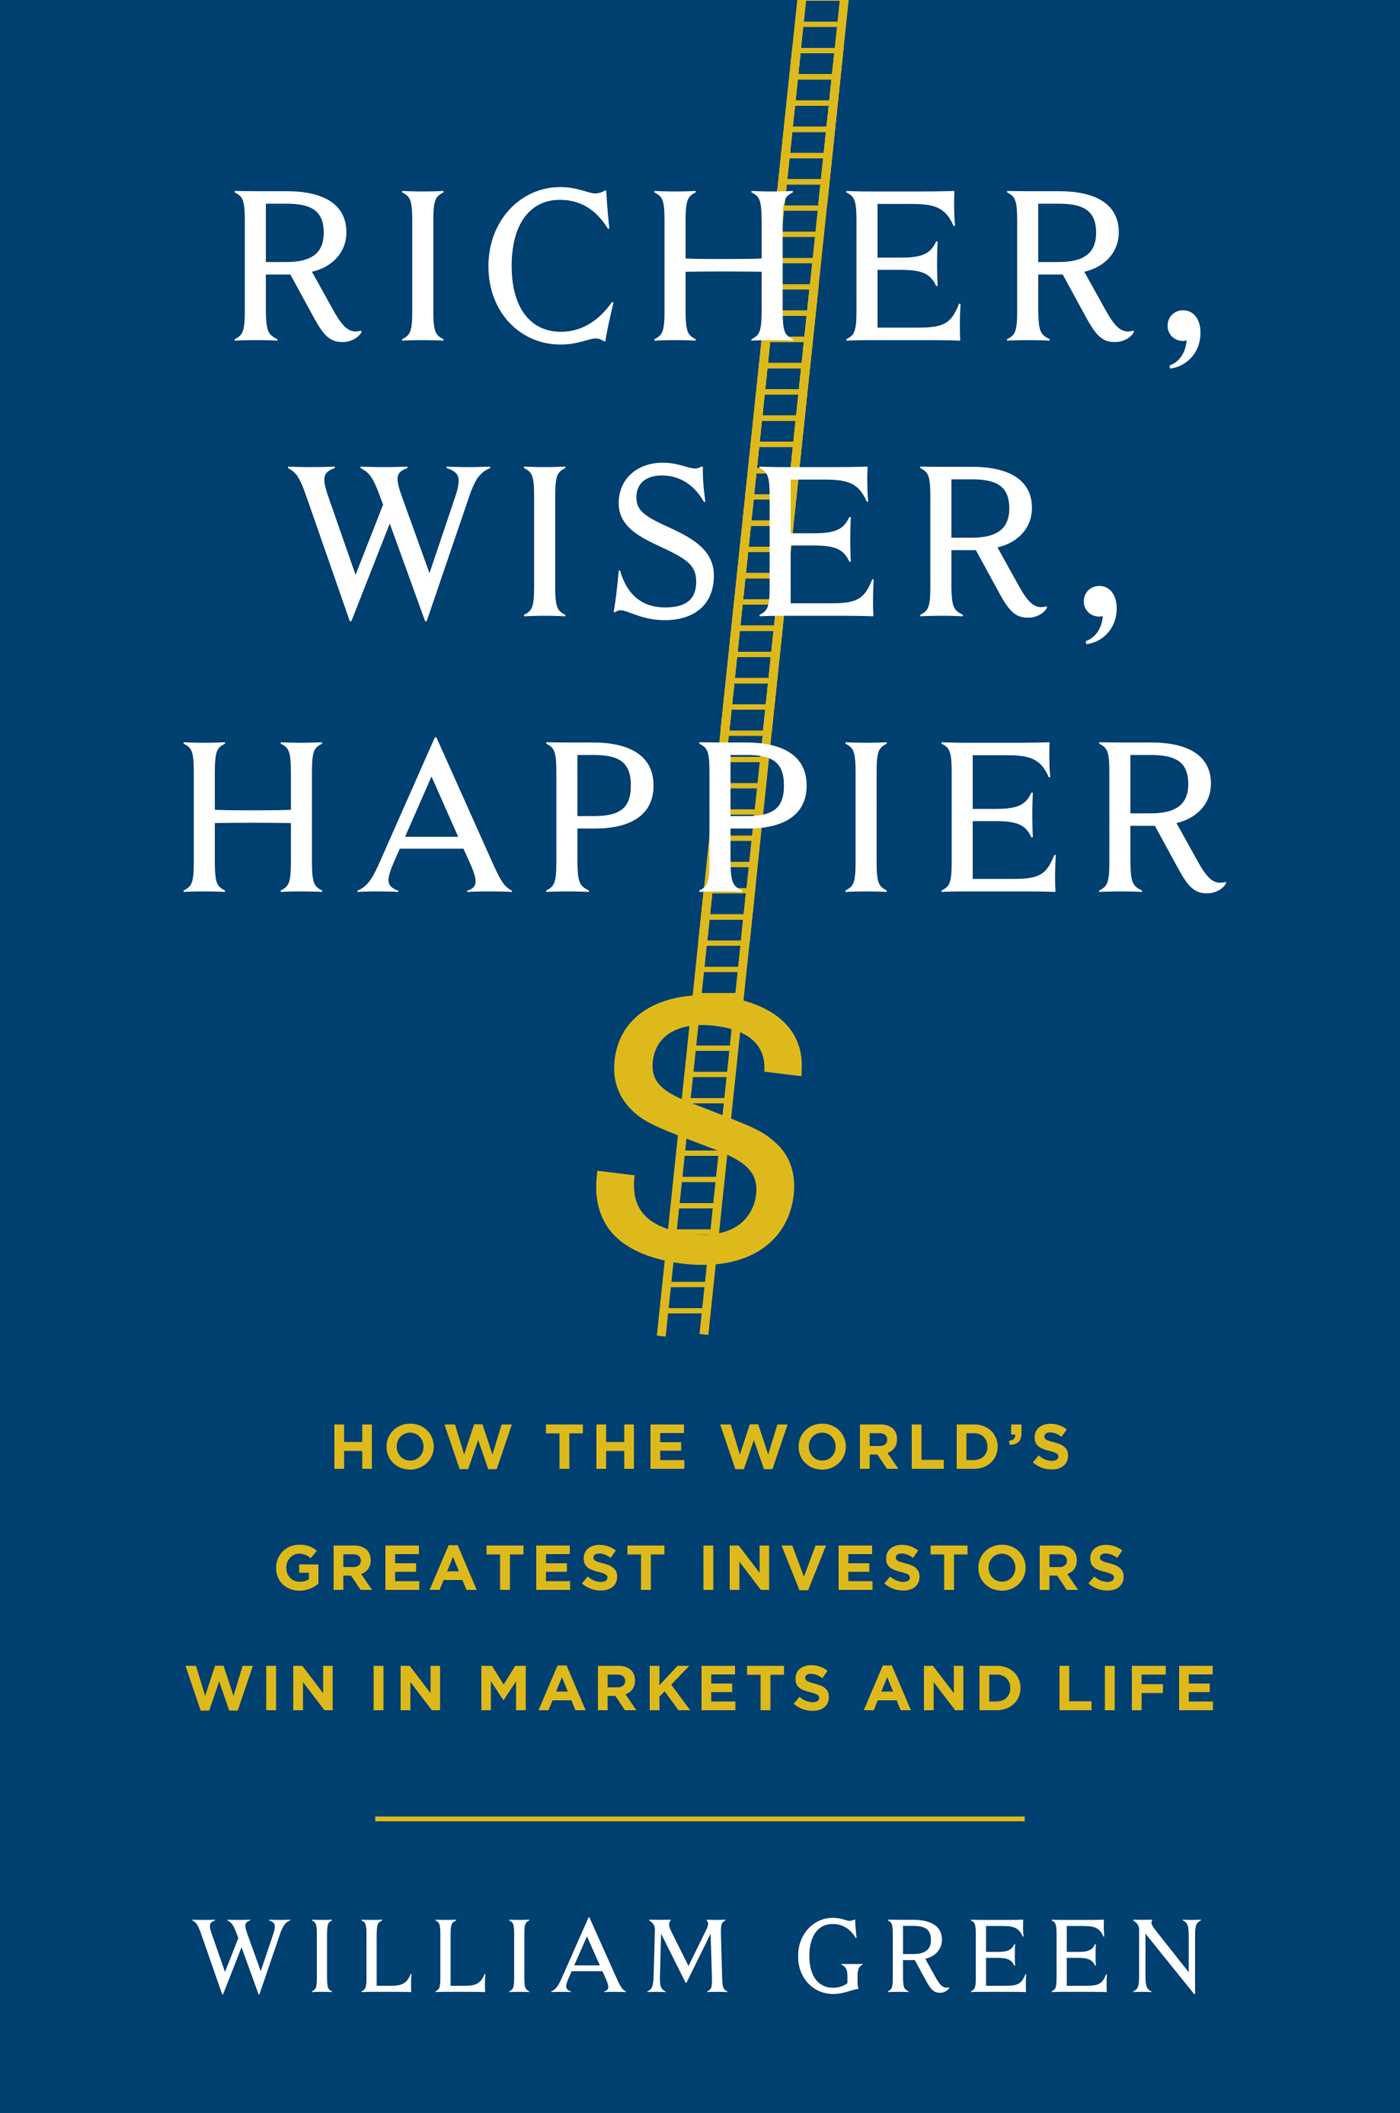 Richer, Wiser, Happier | How the world's greatest investors win in markets and life | Whilliam Green